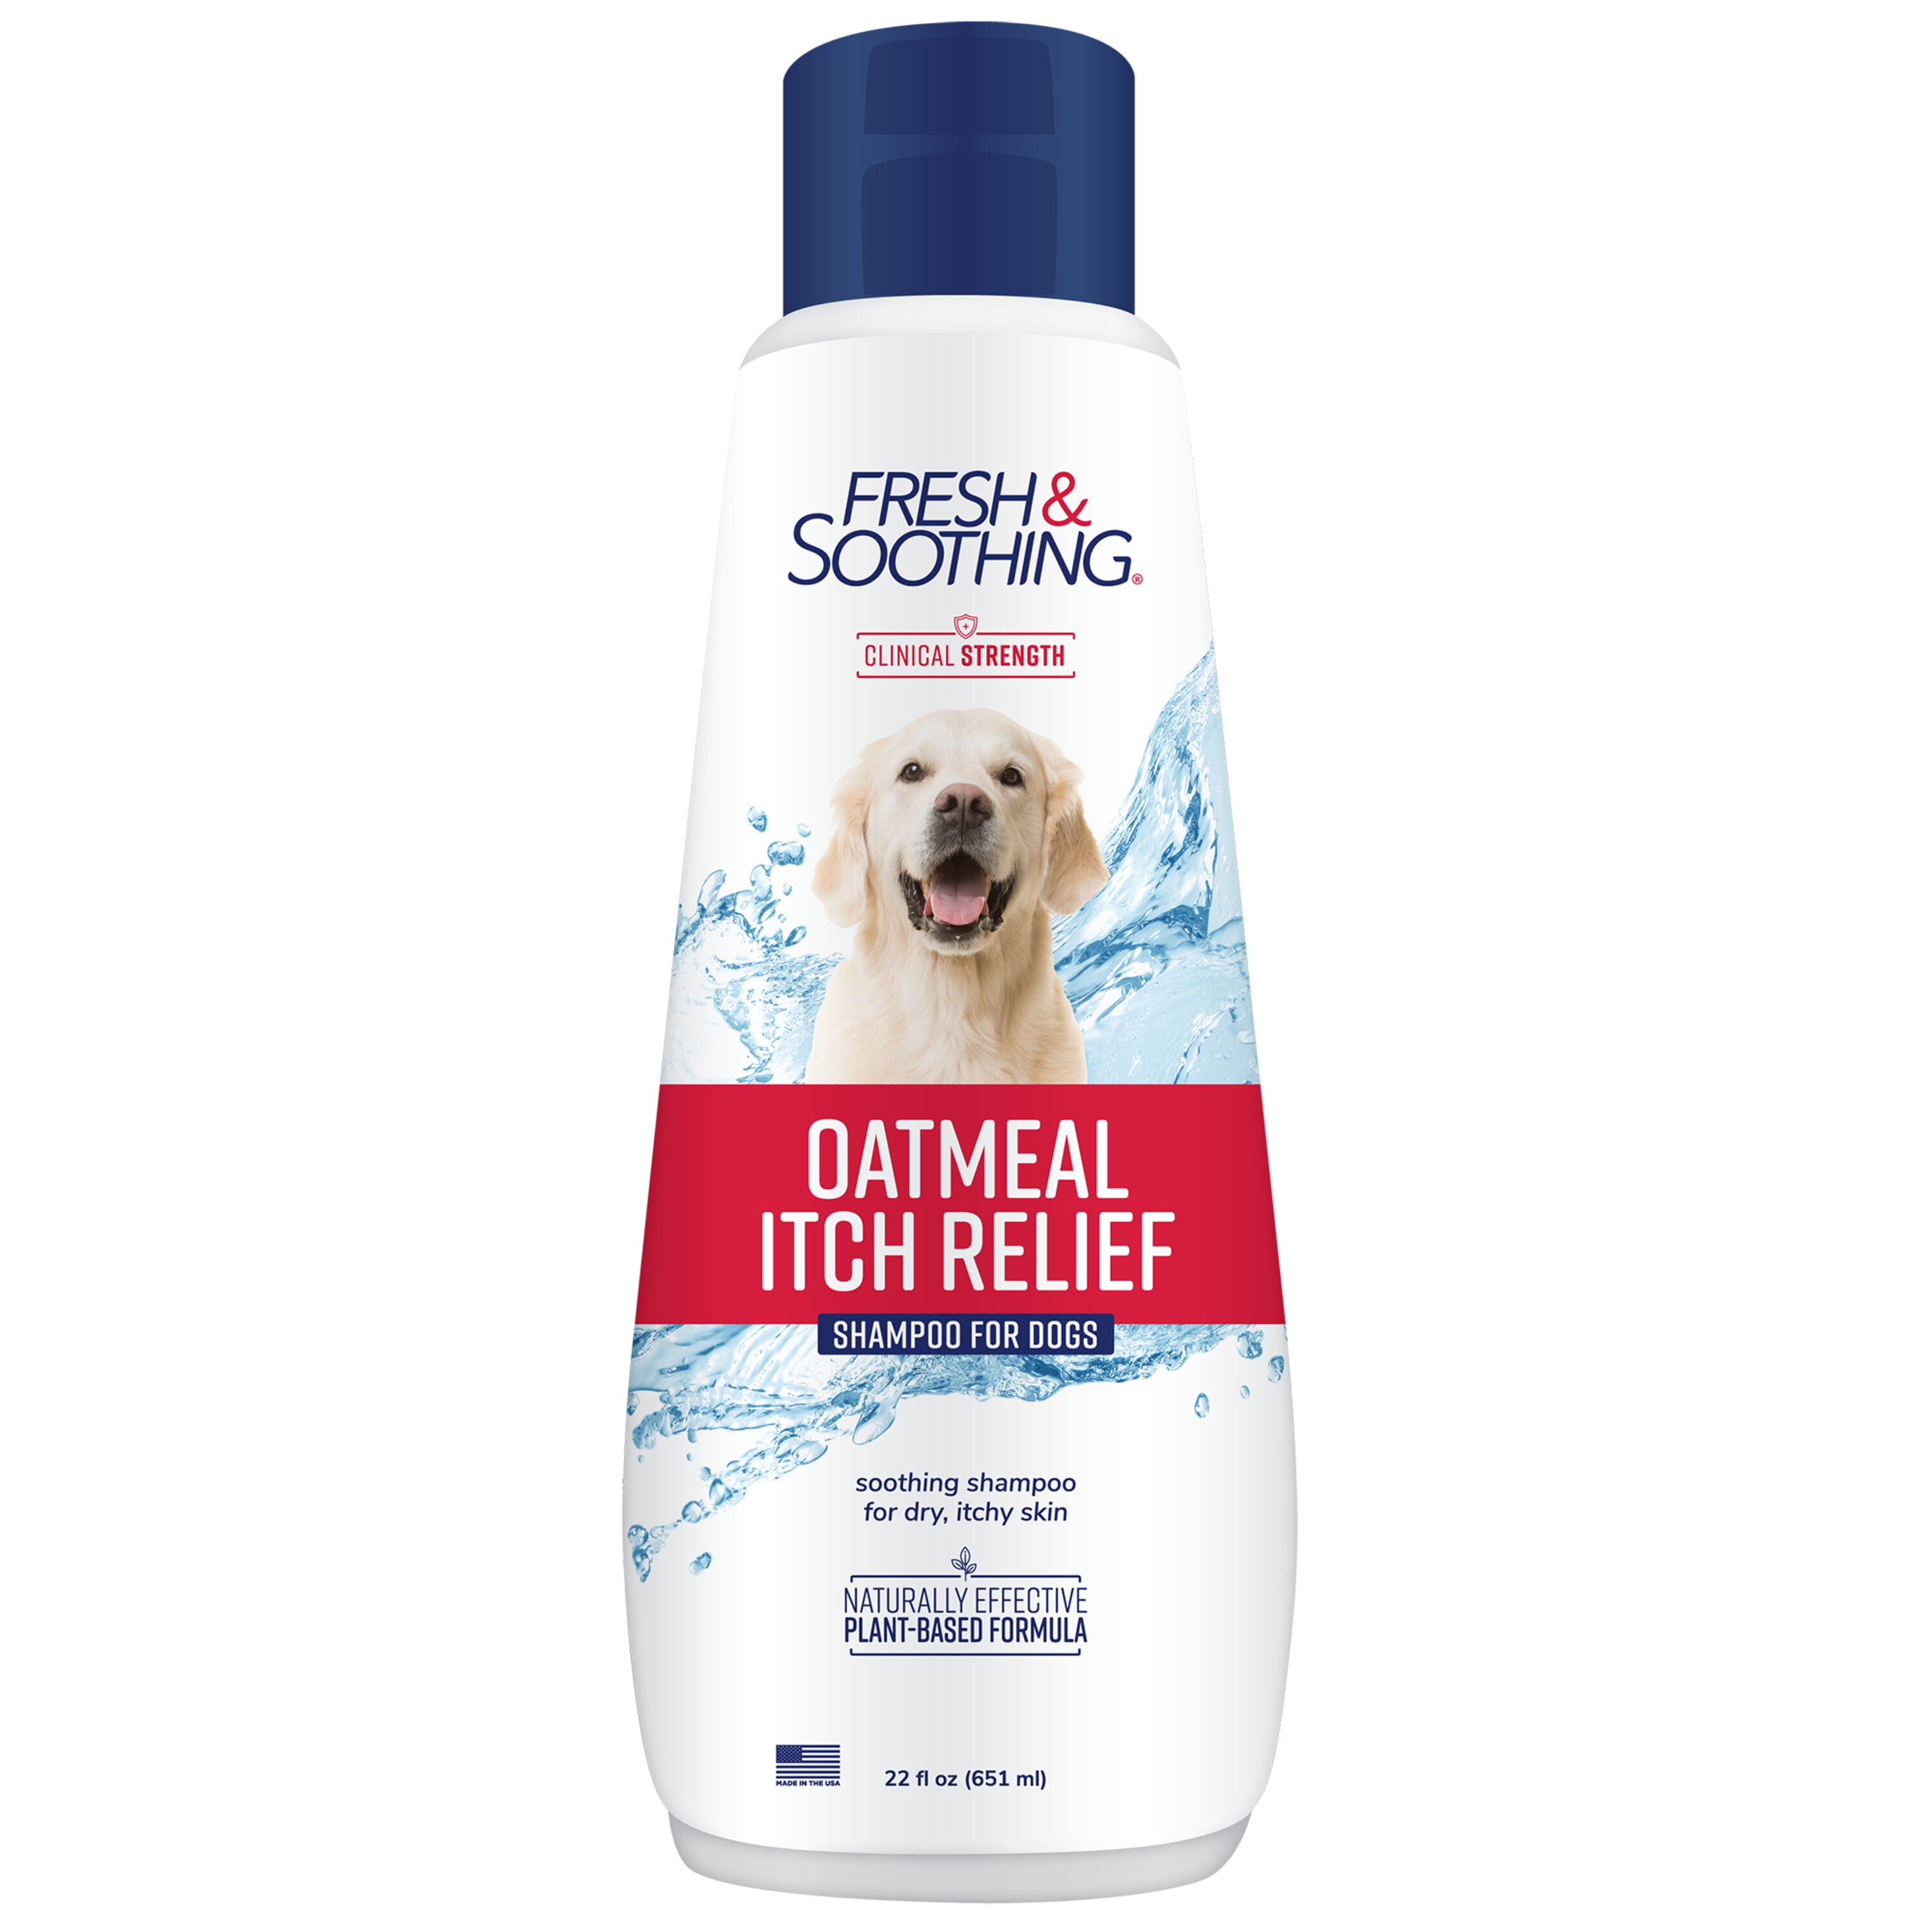 Fresh & Soothing Oatmeal Itch Relief Dog Shampoo for Pets, 22 oz